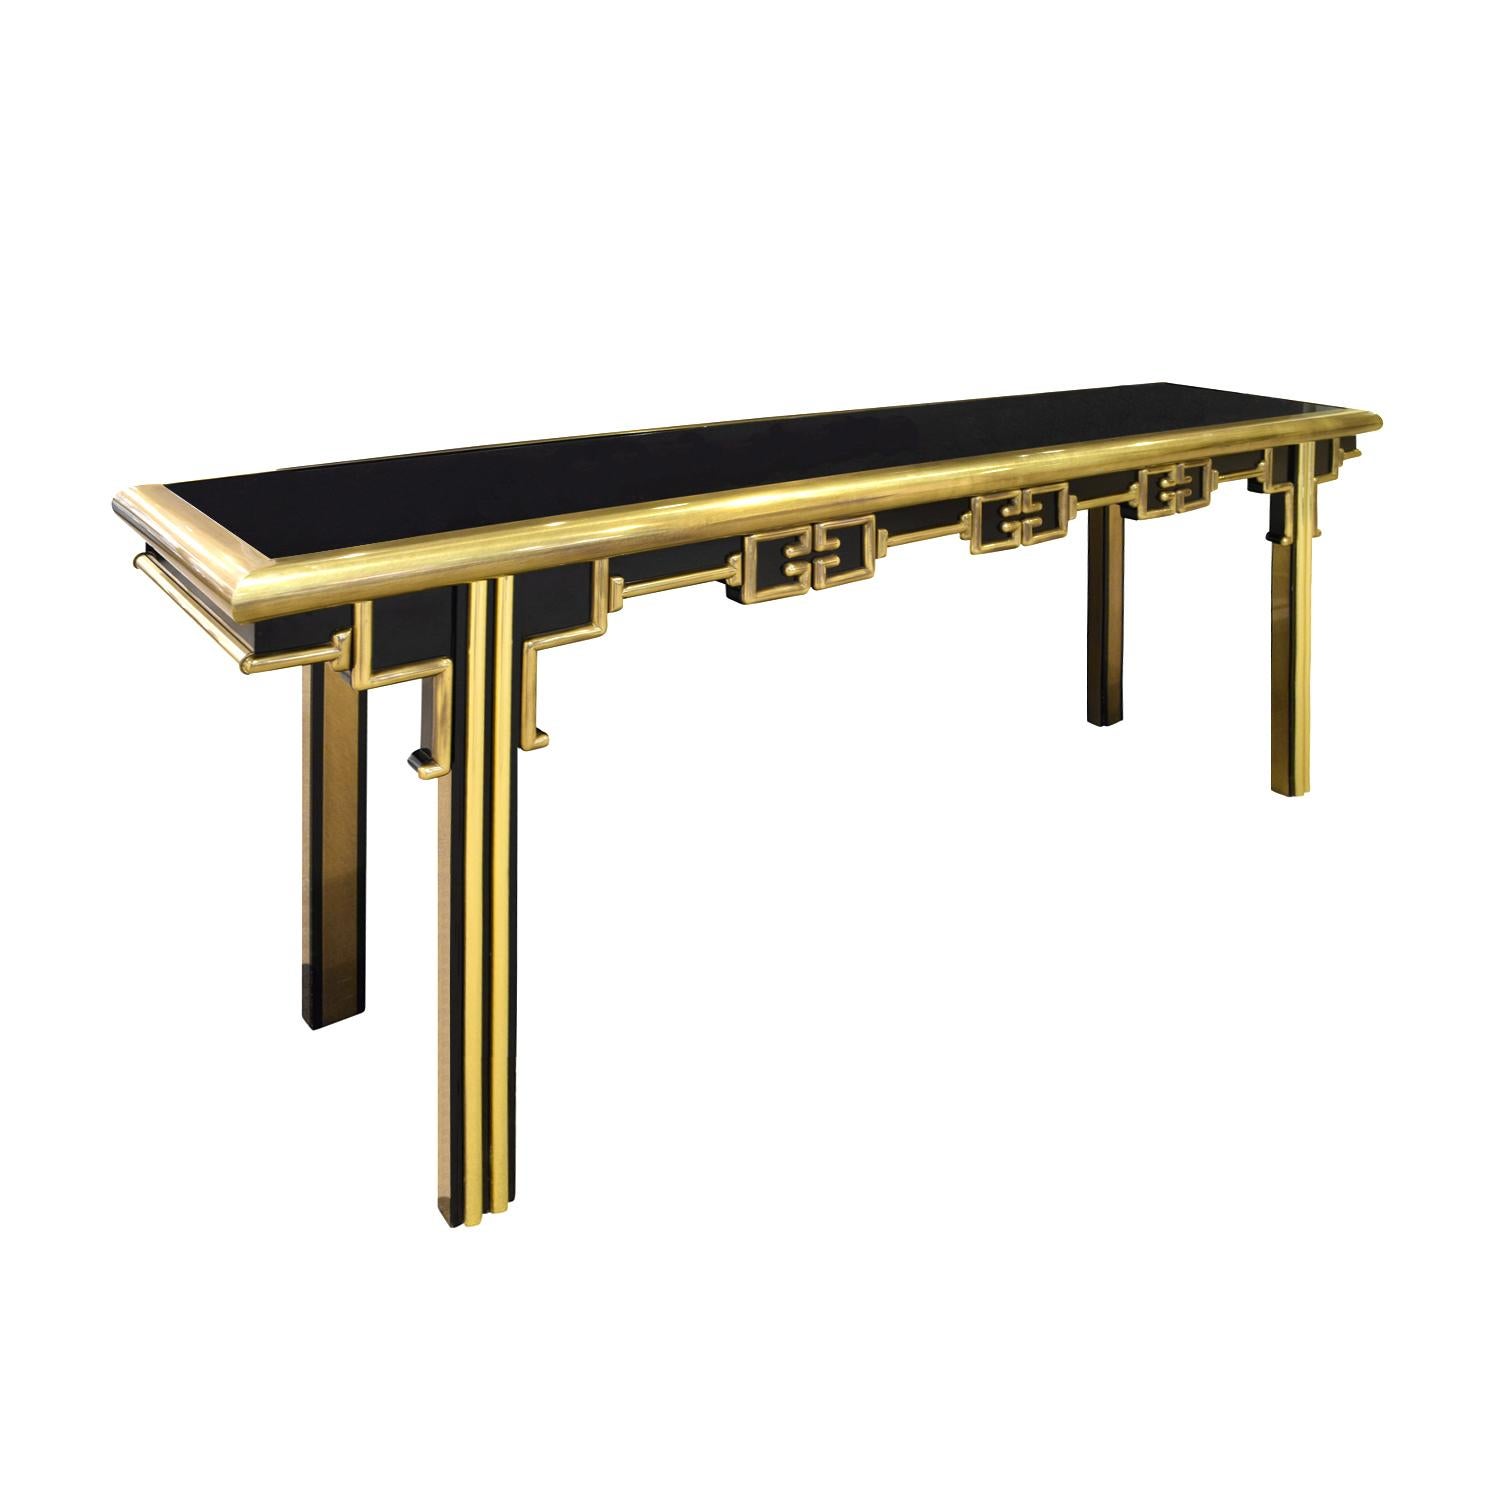 Exceptional Greek Key console table, ebonized with elaborate ornamental design in brass, by Mastercraft, American 1960s (signed on back). This table is very chic and beautifully made.